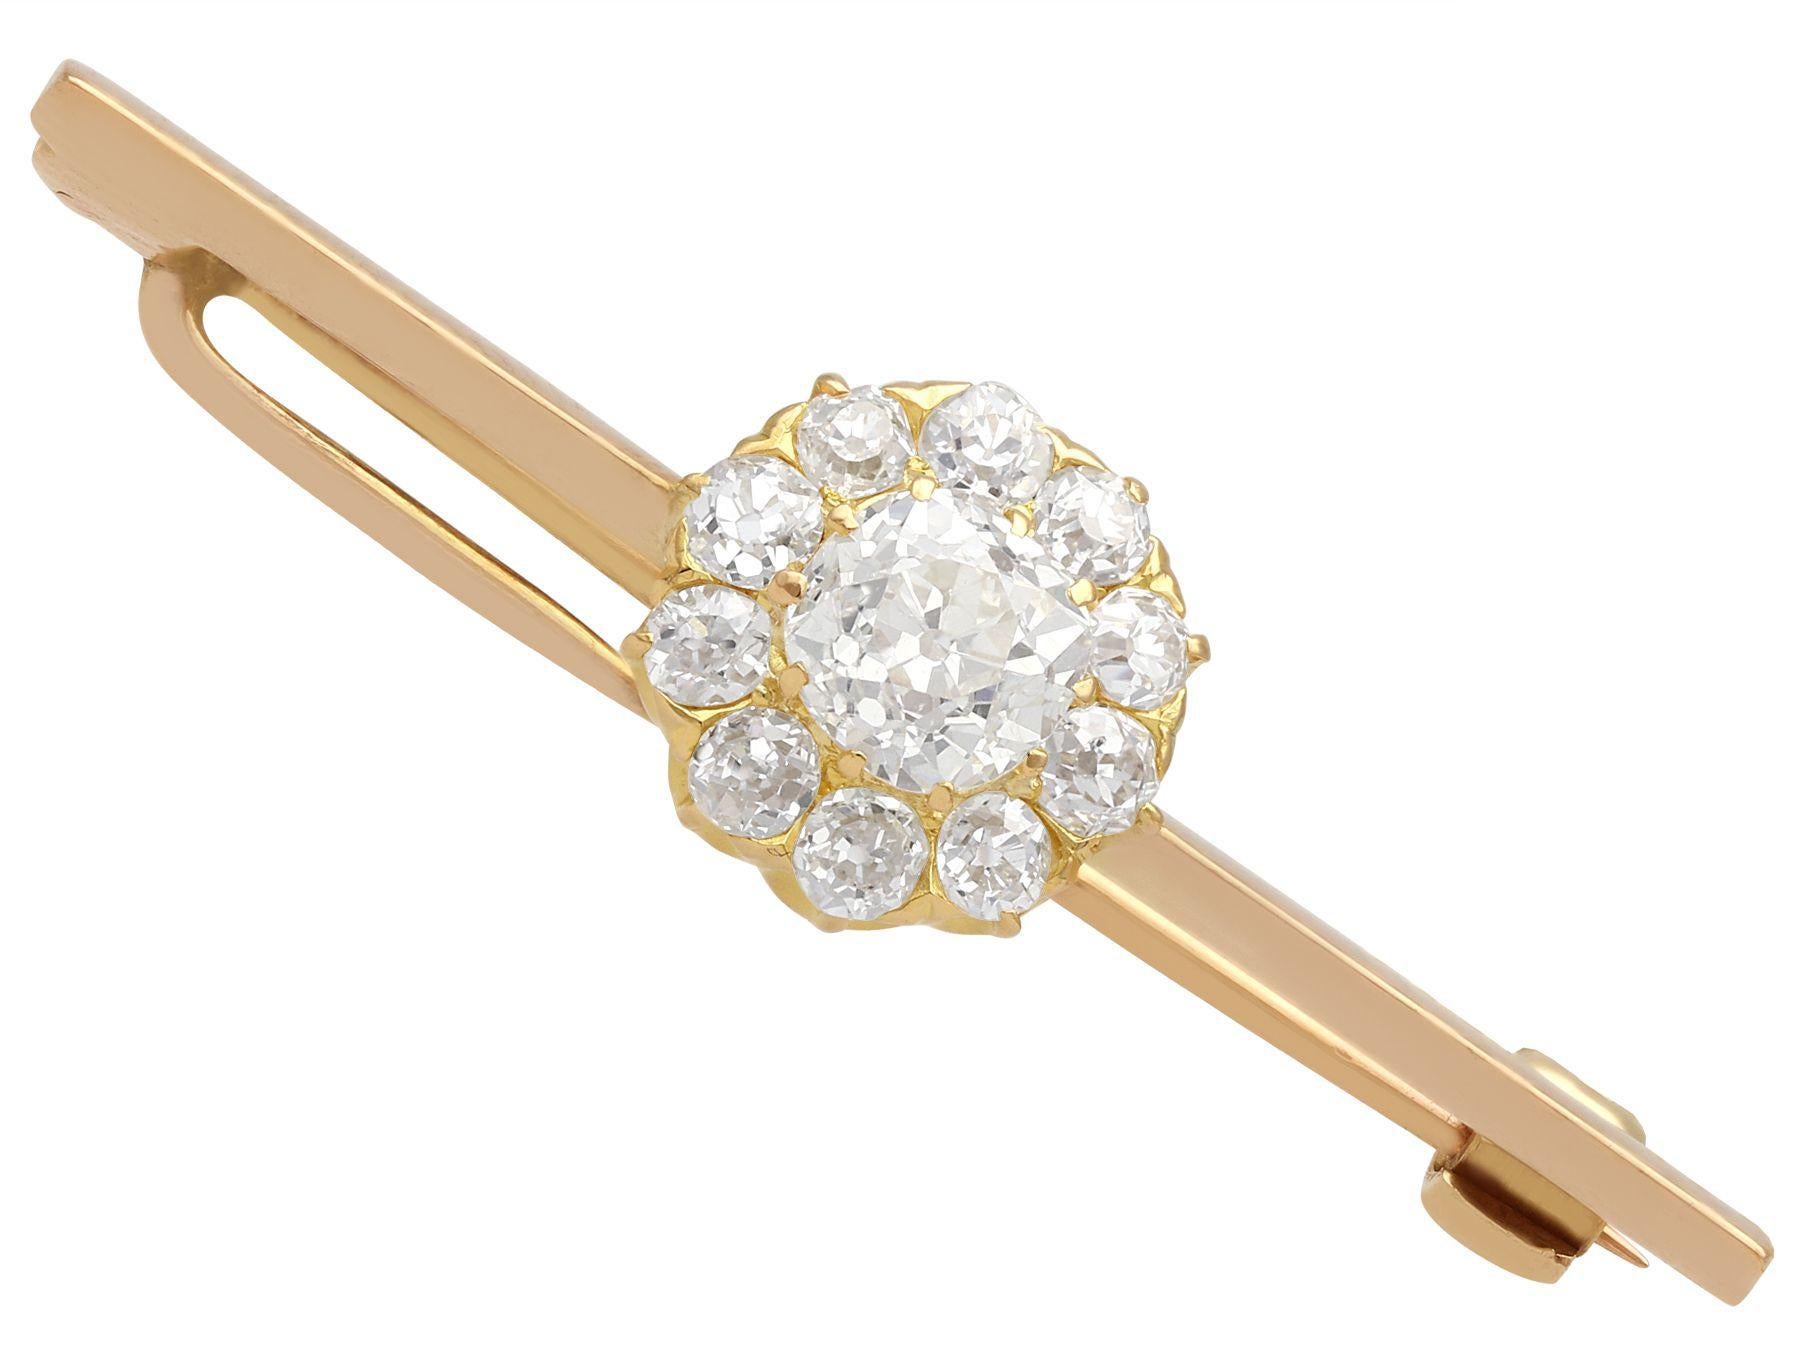 An impressive antique 1.44 carat diamond and 15 karat rose gold, 15 karat yellow gold set bar style brooch; part of our diverse antique jewelry and estate jewelry collections.

This fine and impressive antique bar brooch has been crafted in 15k rose